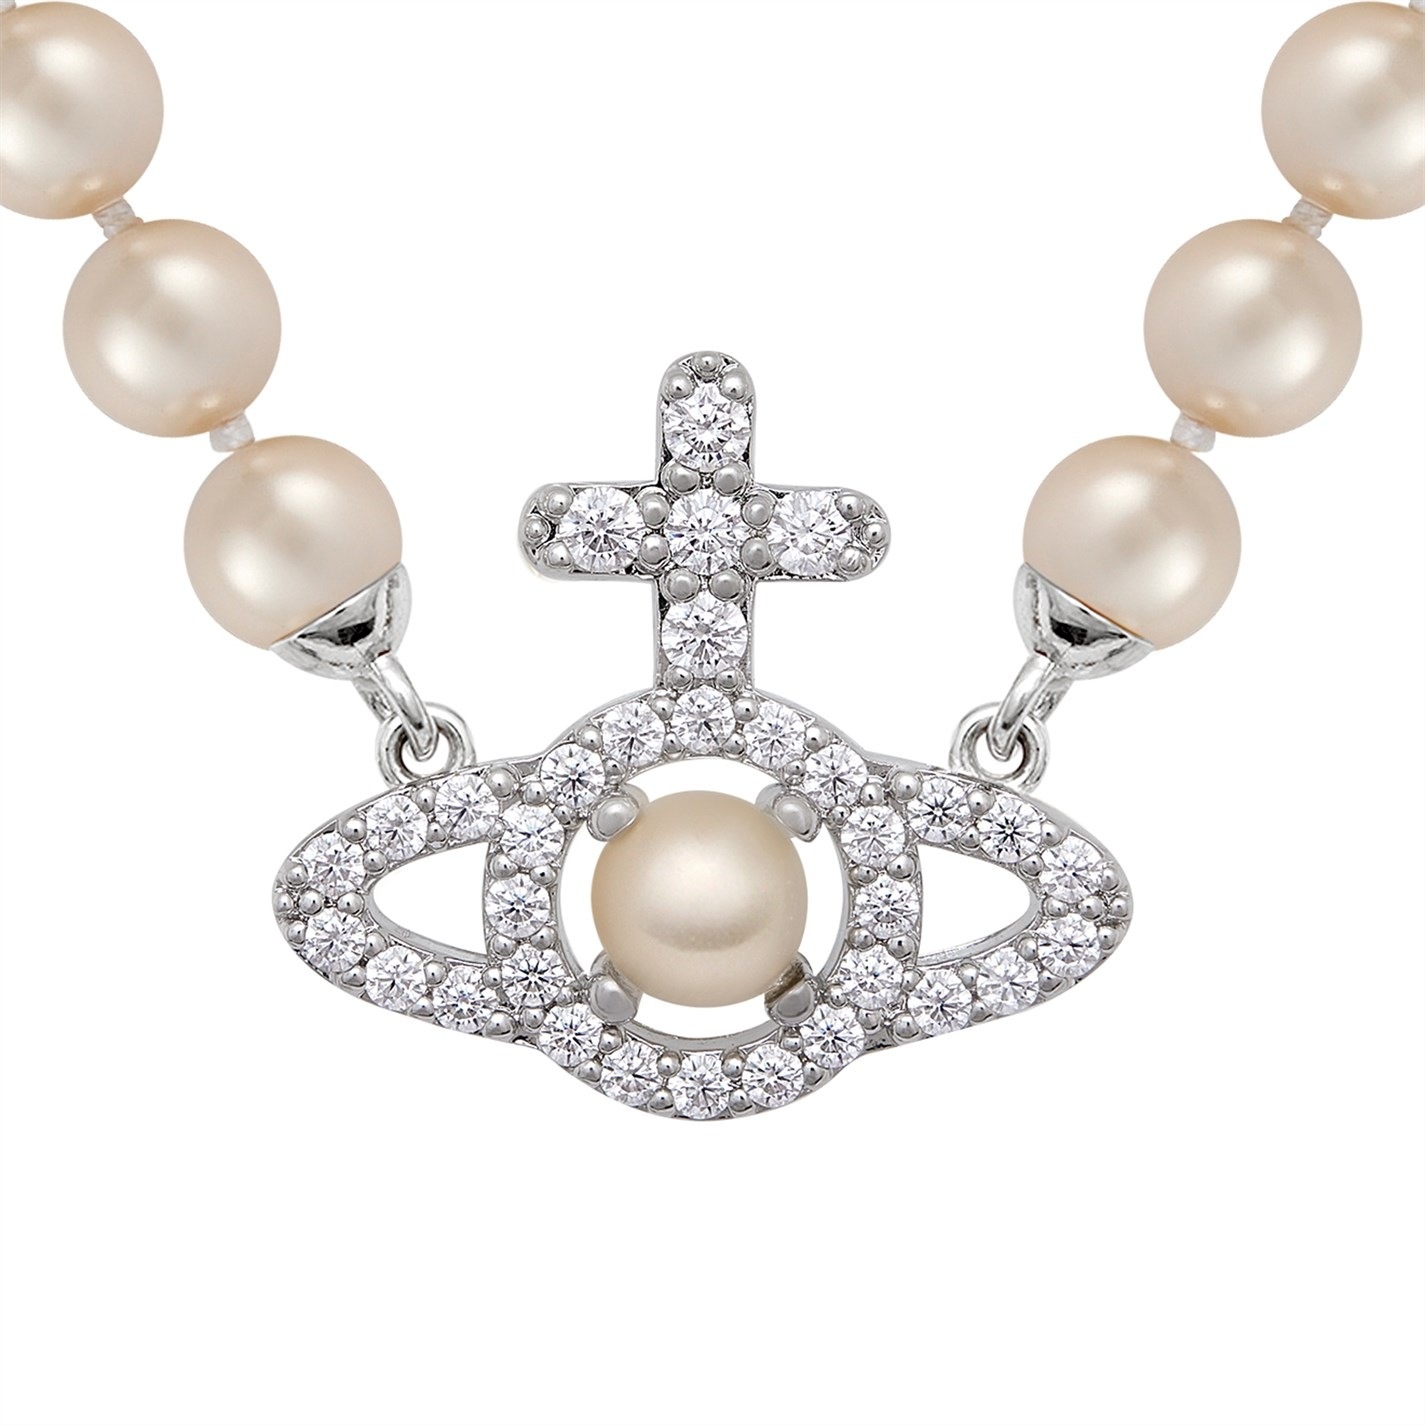 OLYMPIA PEARL NECKLACE - 1